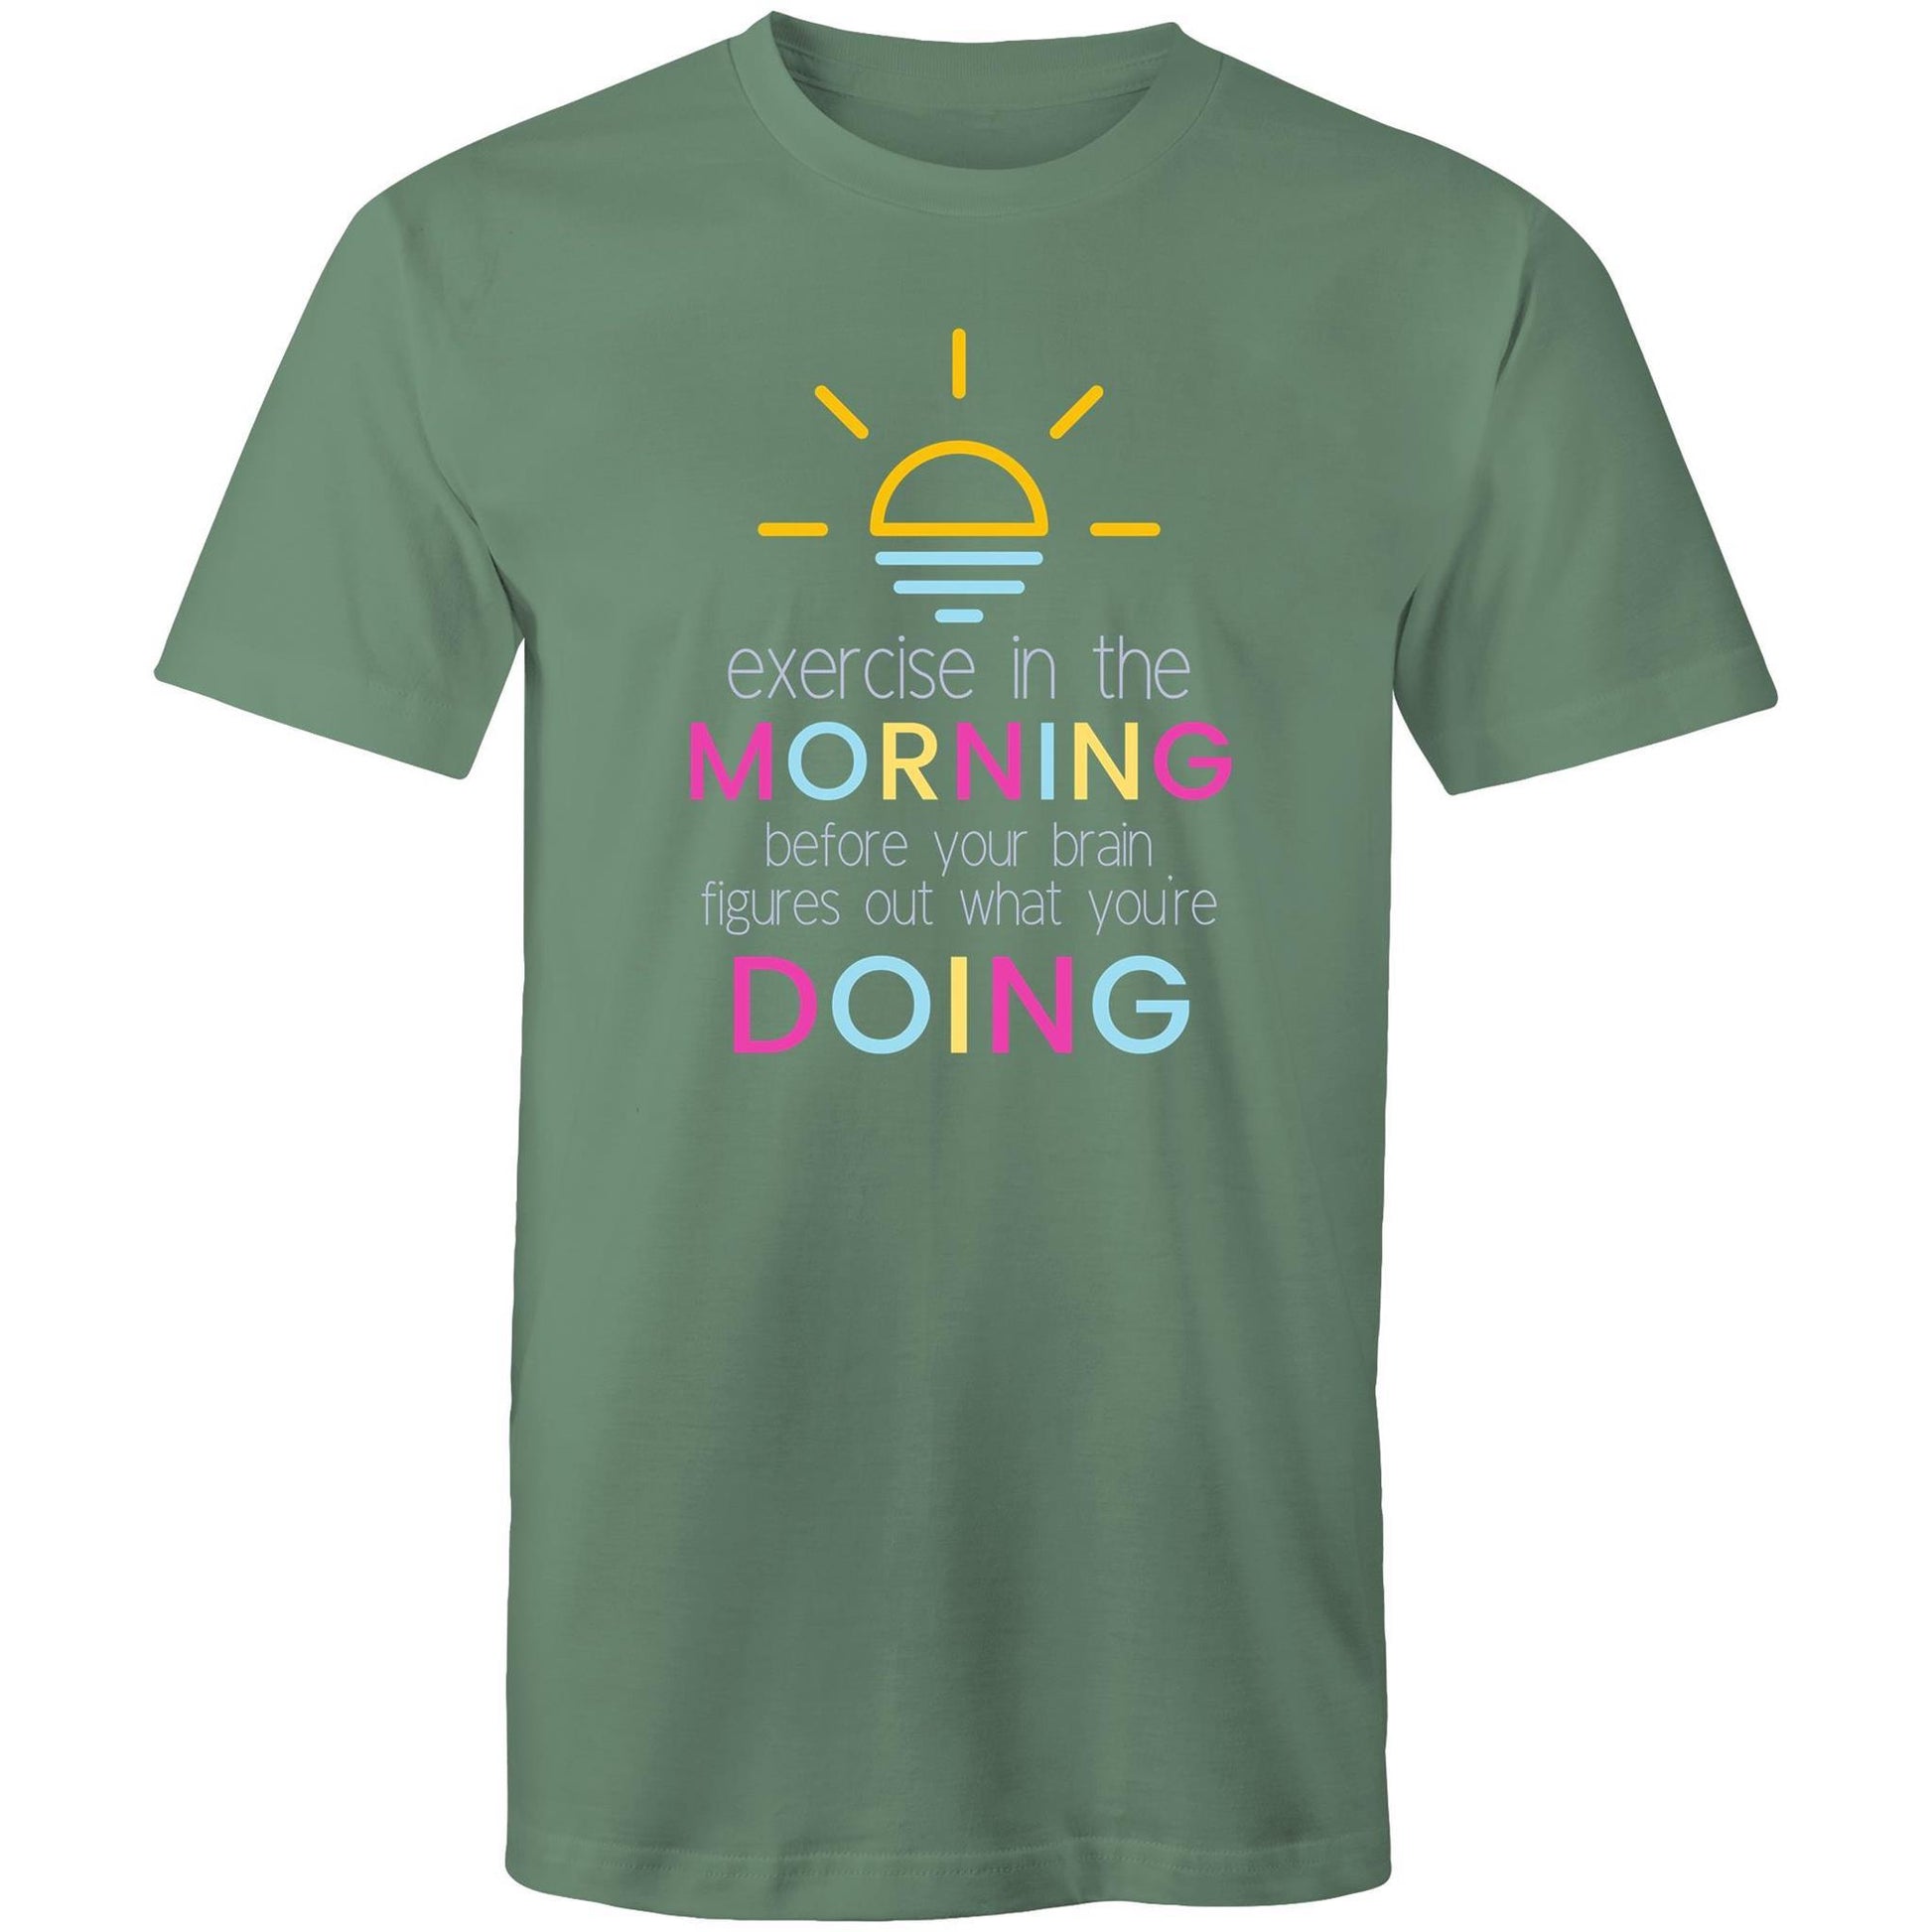 Exercise In The Morning - Short Sleeve T-shirt Sage Fitness T-shirt Fitness Mens Womens